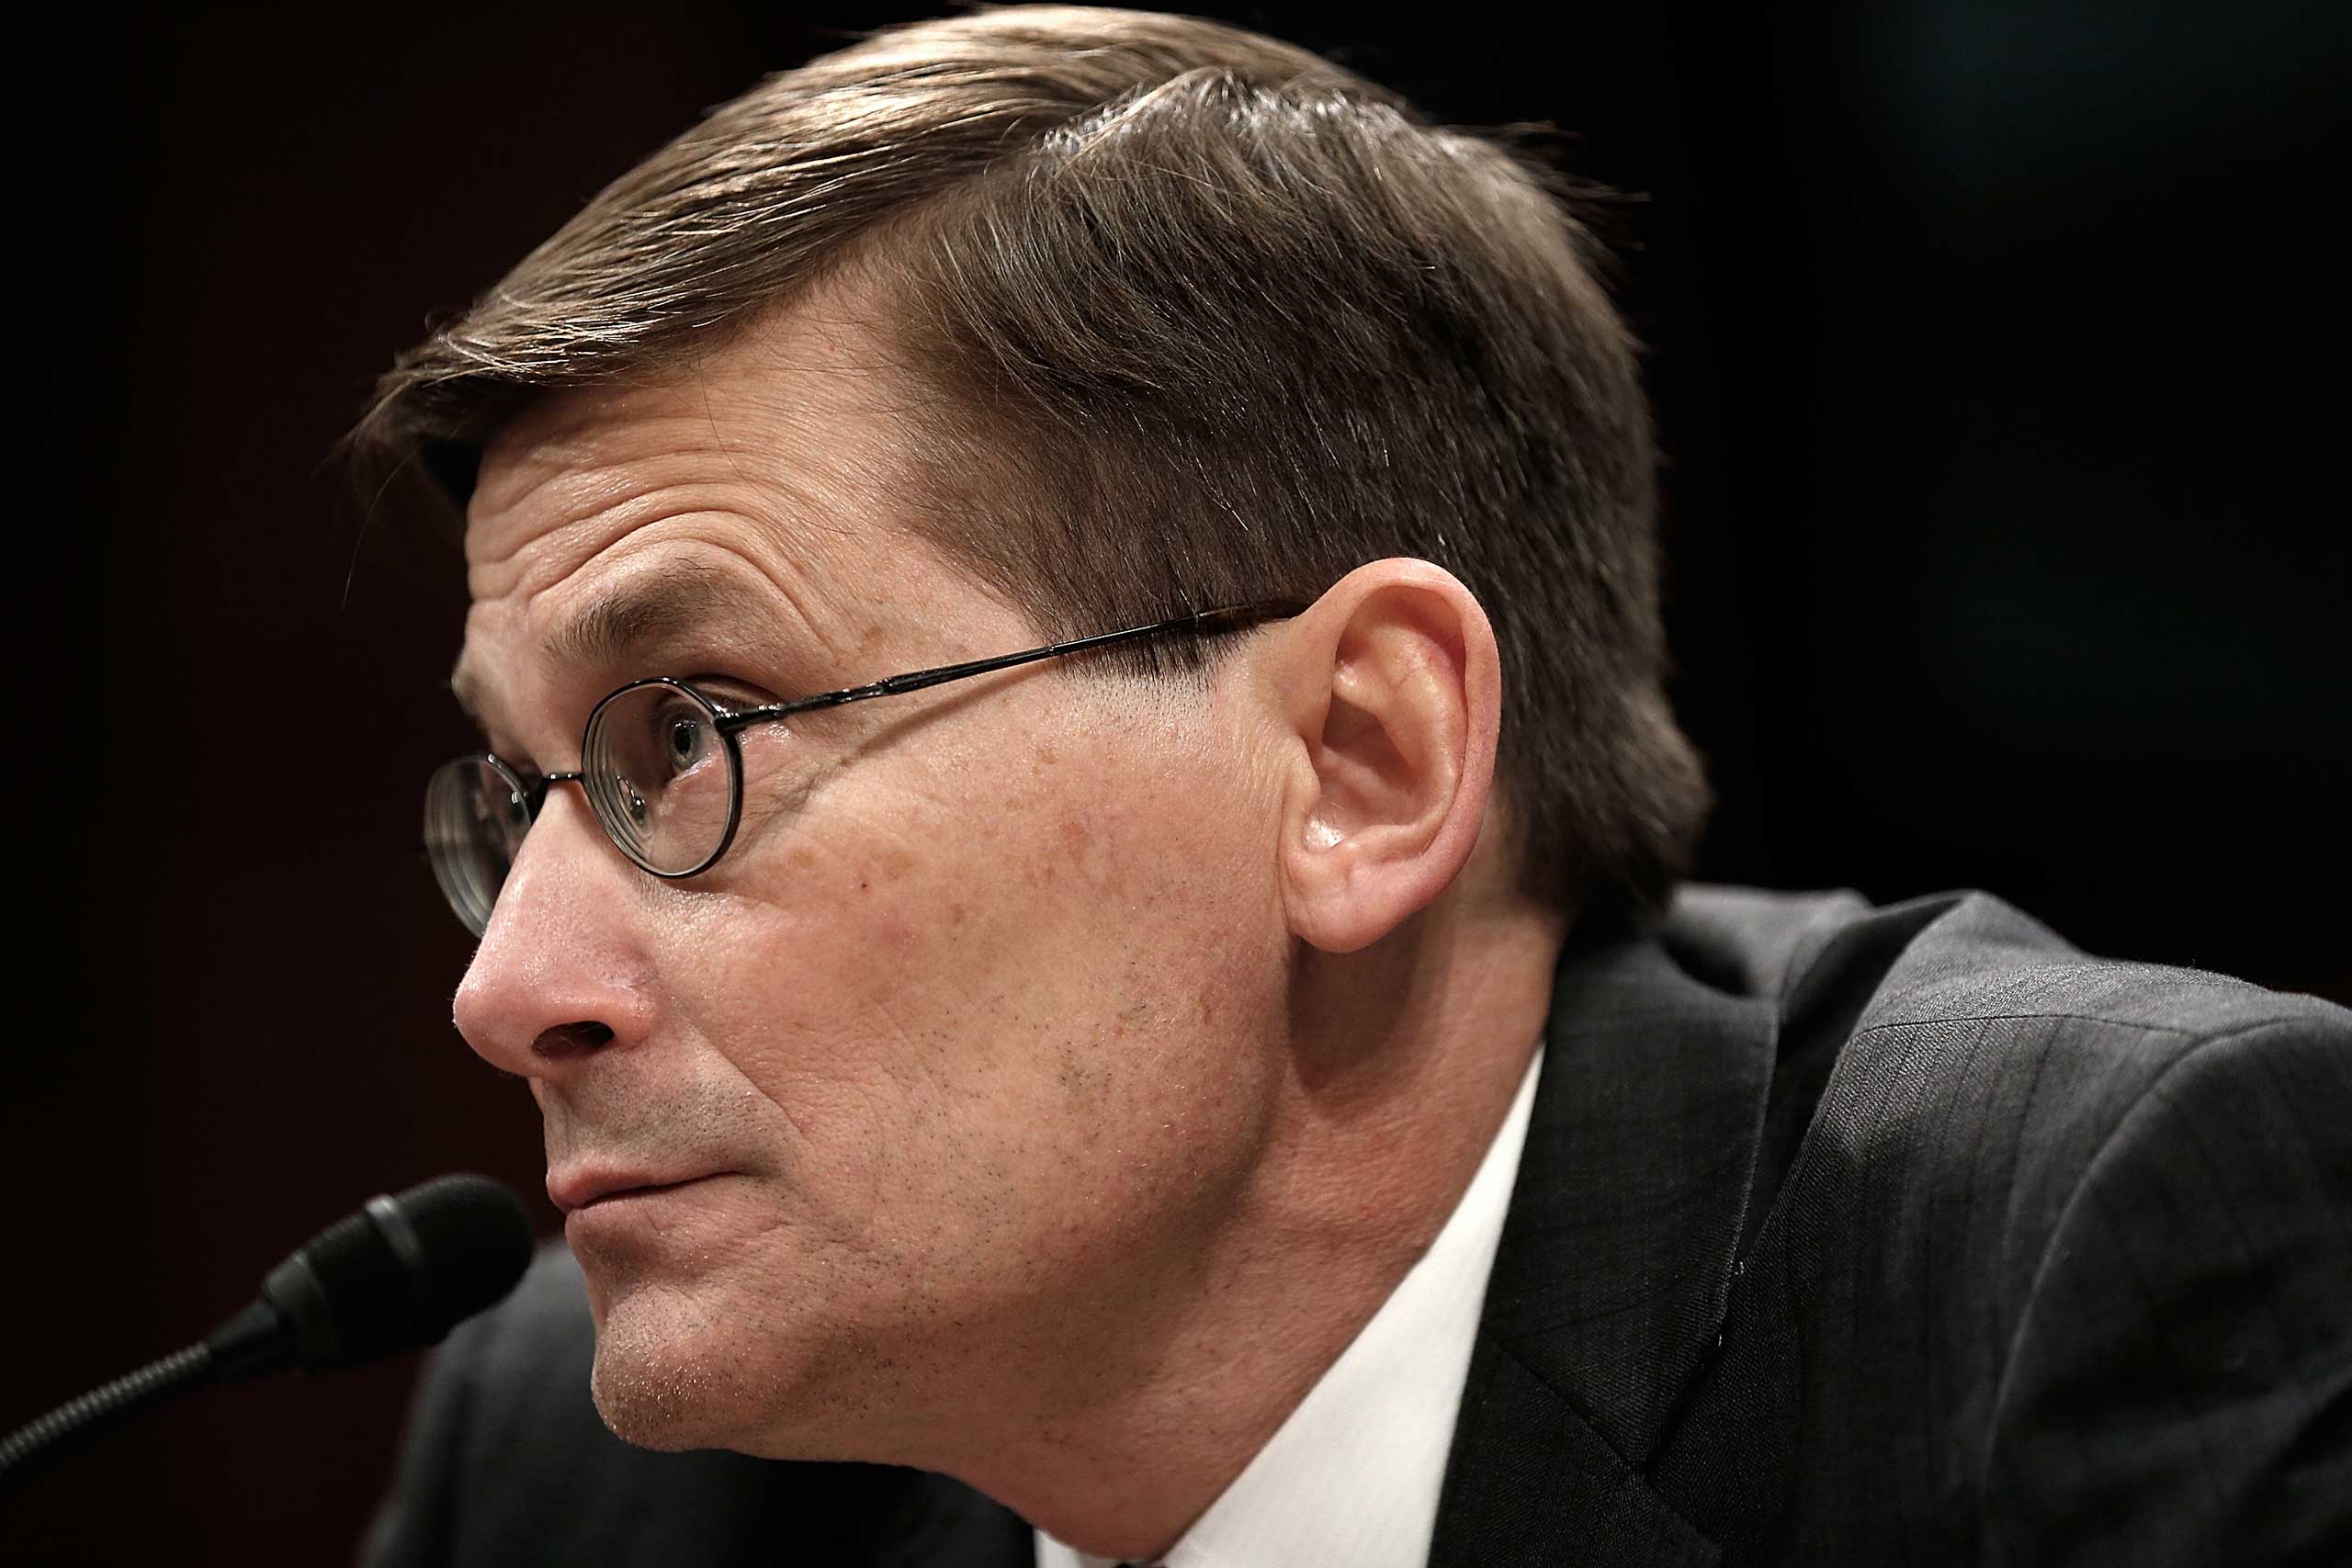 Former Deputy CIA Director Michael Morell testifies before the House Select Intelligence Committee April 2, 2014 in Washington, DC. (Win McNamee—Getty Images)